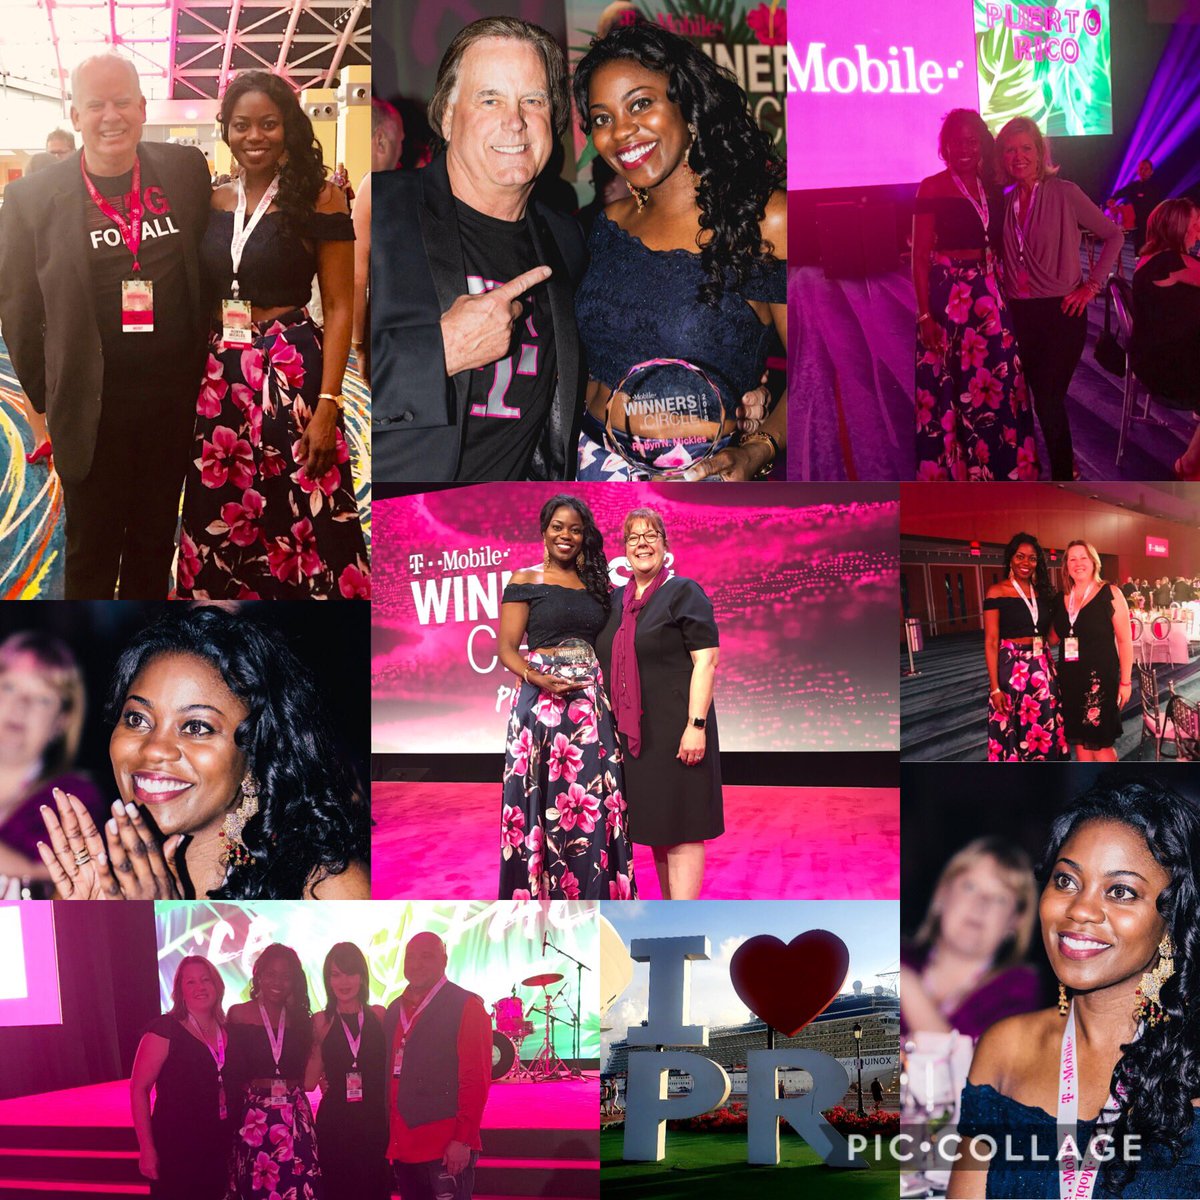 The #TMobilePuertoRico ❤️ is REAL! 🇵🇷 Thank you T-Mobile leaders for an authentic and momentous celebration! 🇵🇷🎉🏆🌺@LizInMotion #WC19 #1HR #BeYou